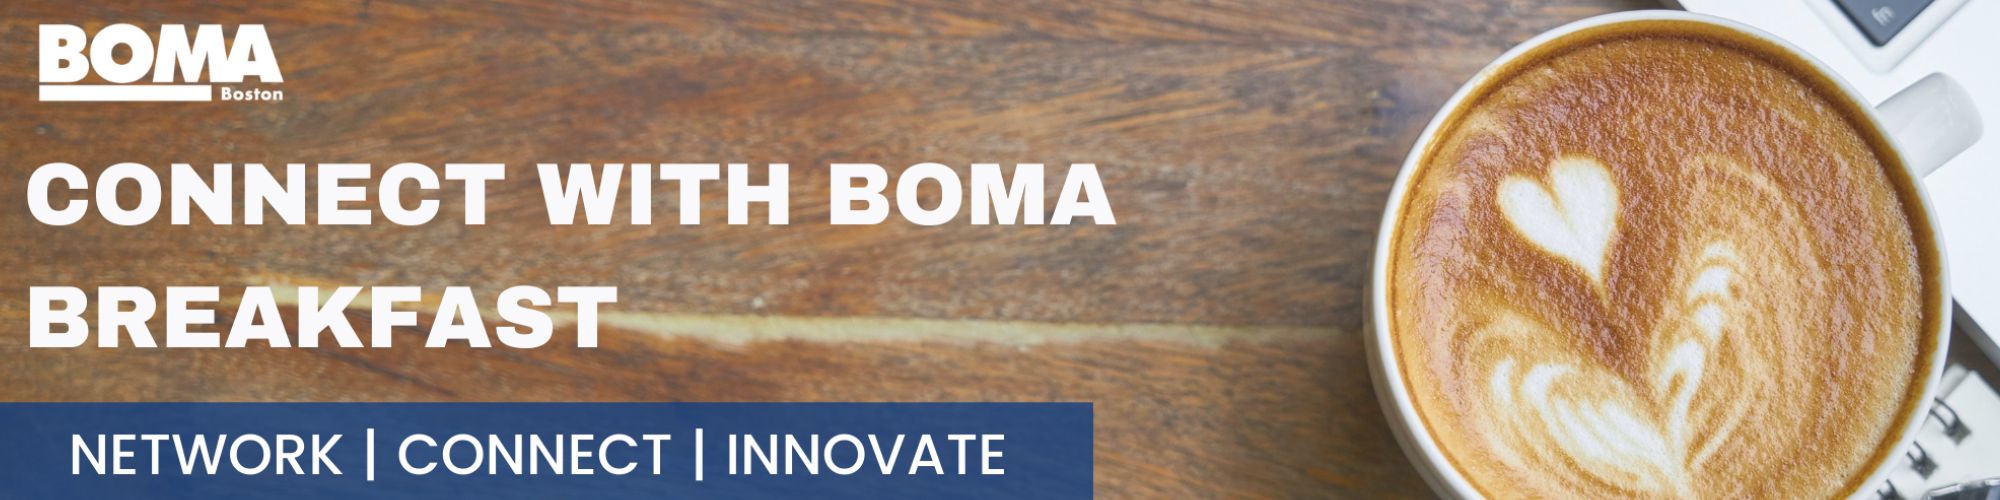 Connect With BOMA Breakfast